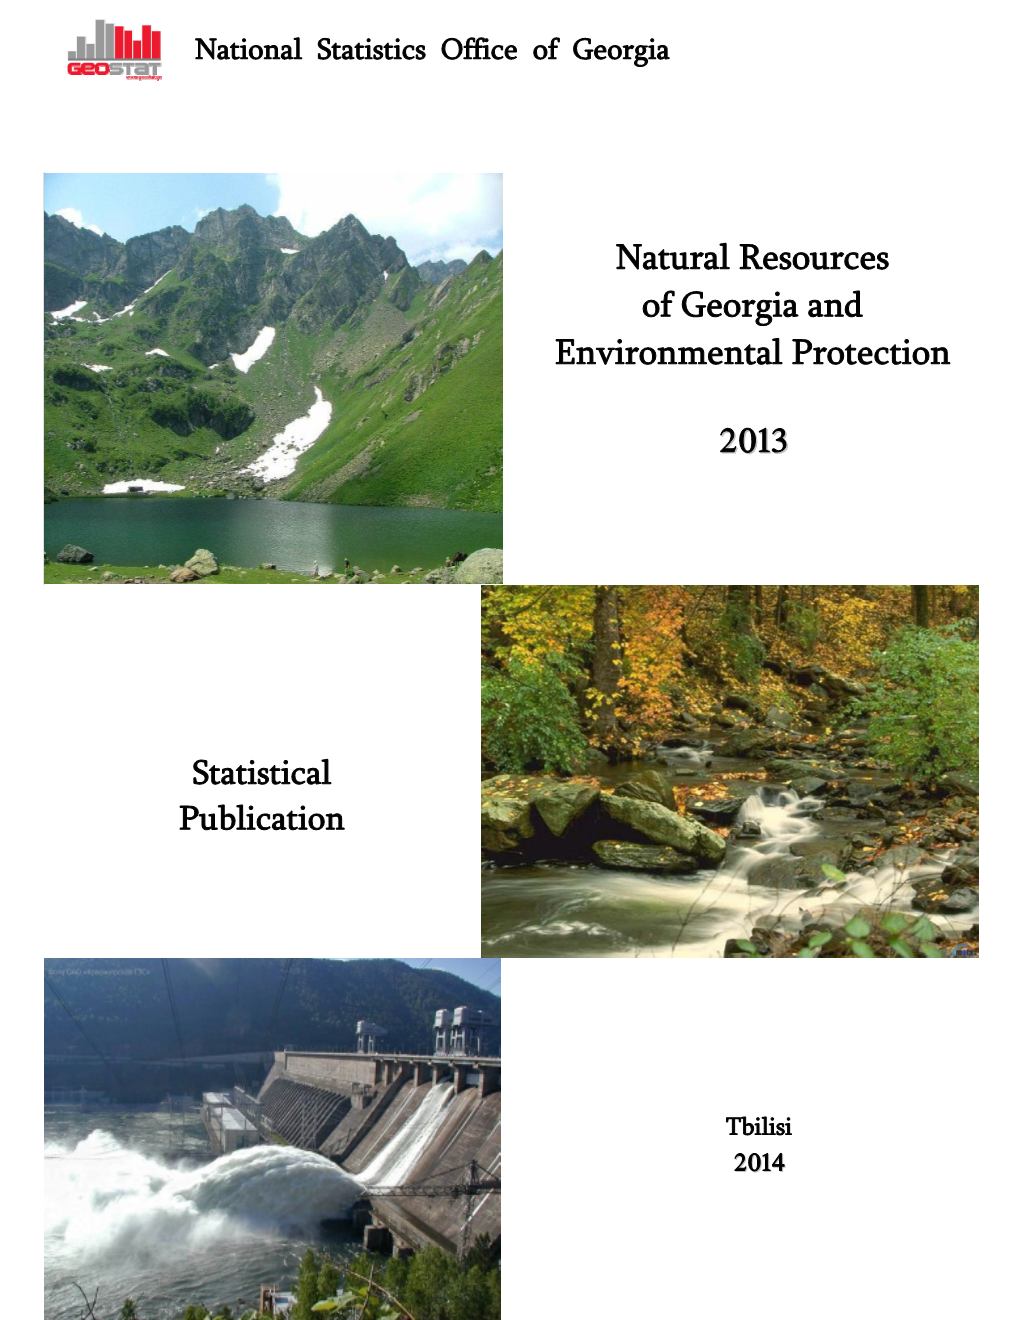 Natural Resources of Georgia and Environmental Protection